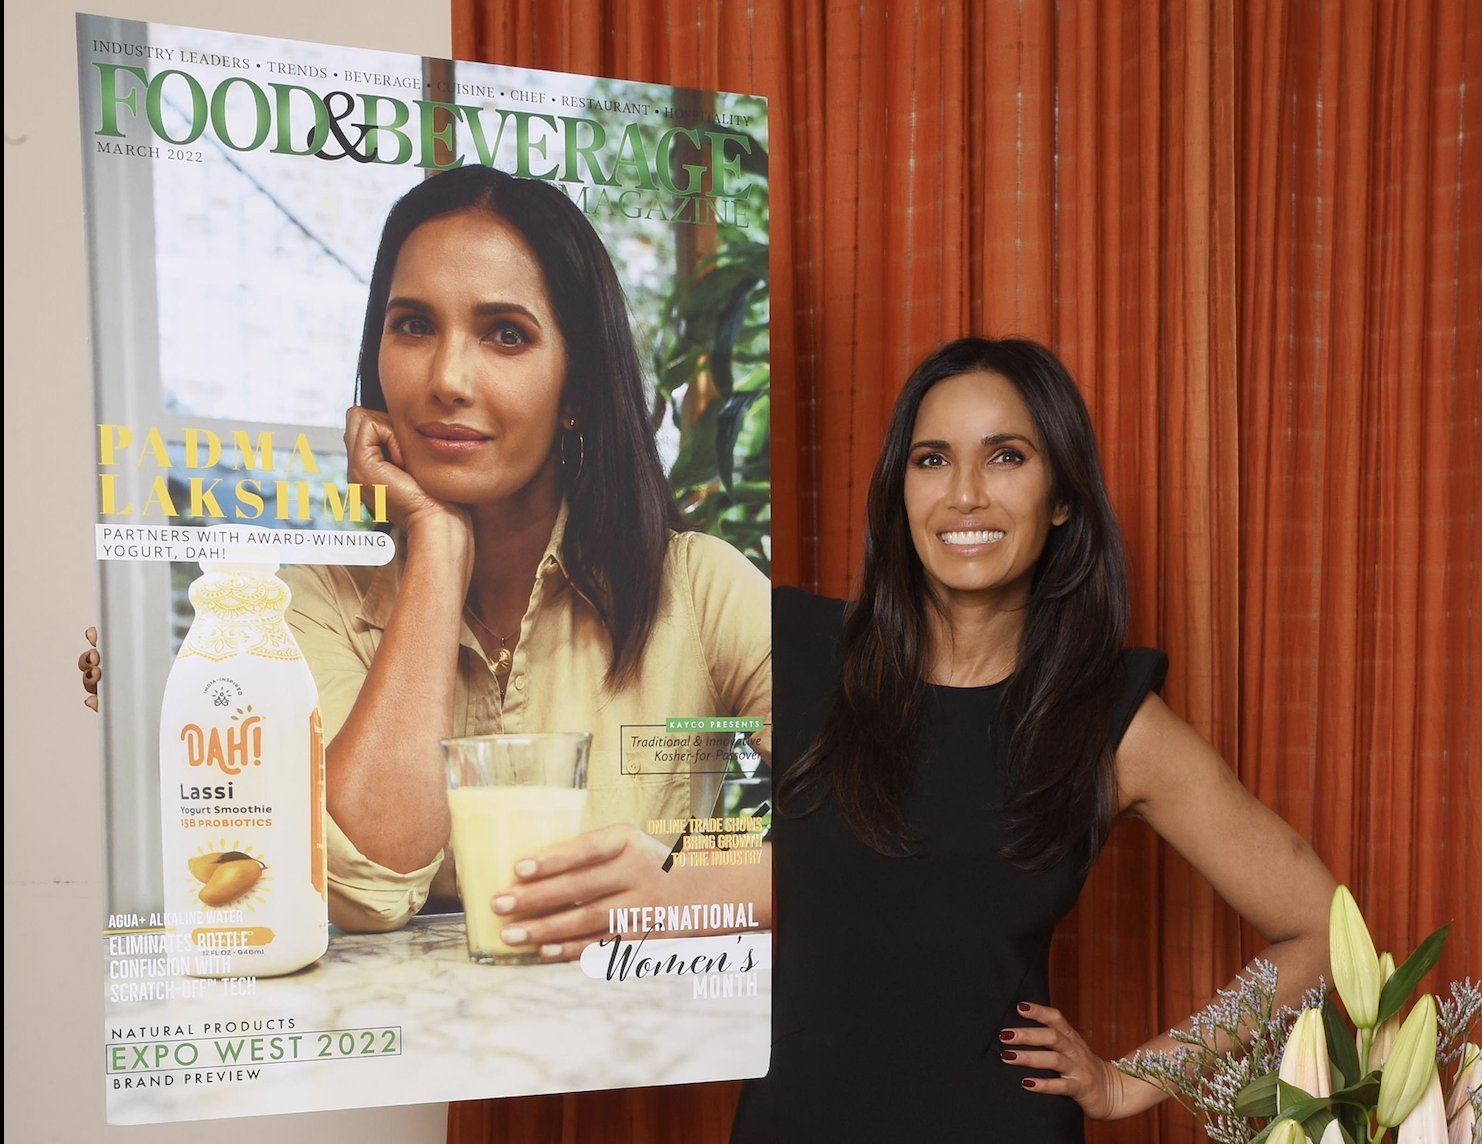 Padma Lakshmi Celebrates her March 2022 Cover of Food &#038; Beverage Magazine and DAH! yogurt partnership at a private event in New York City